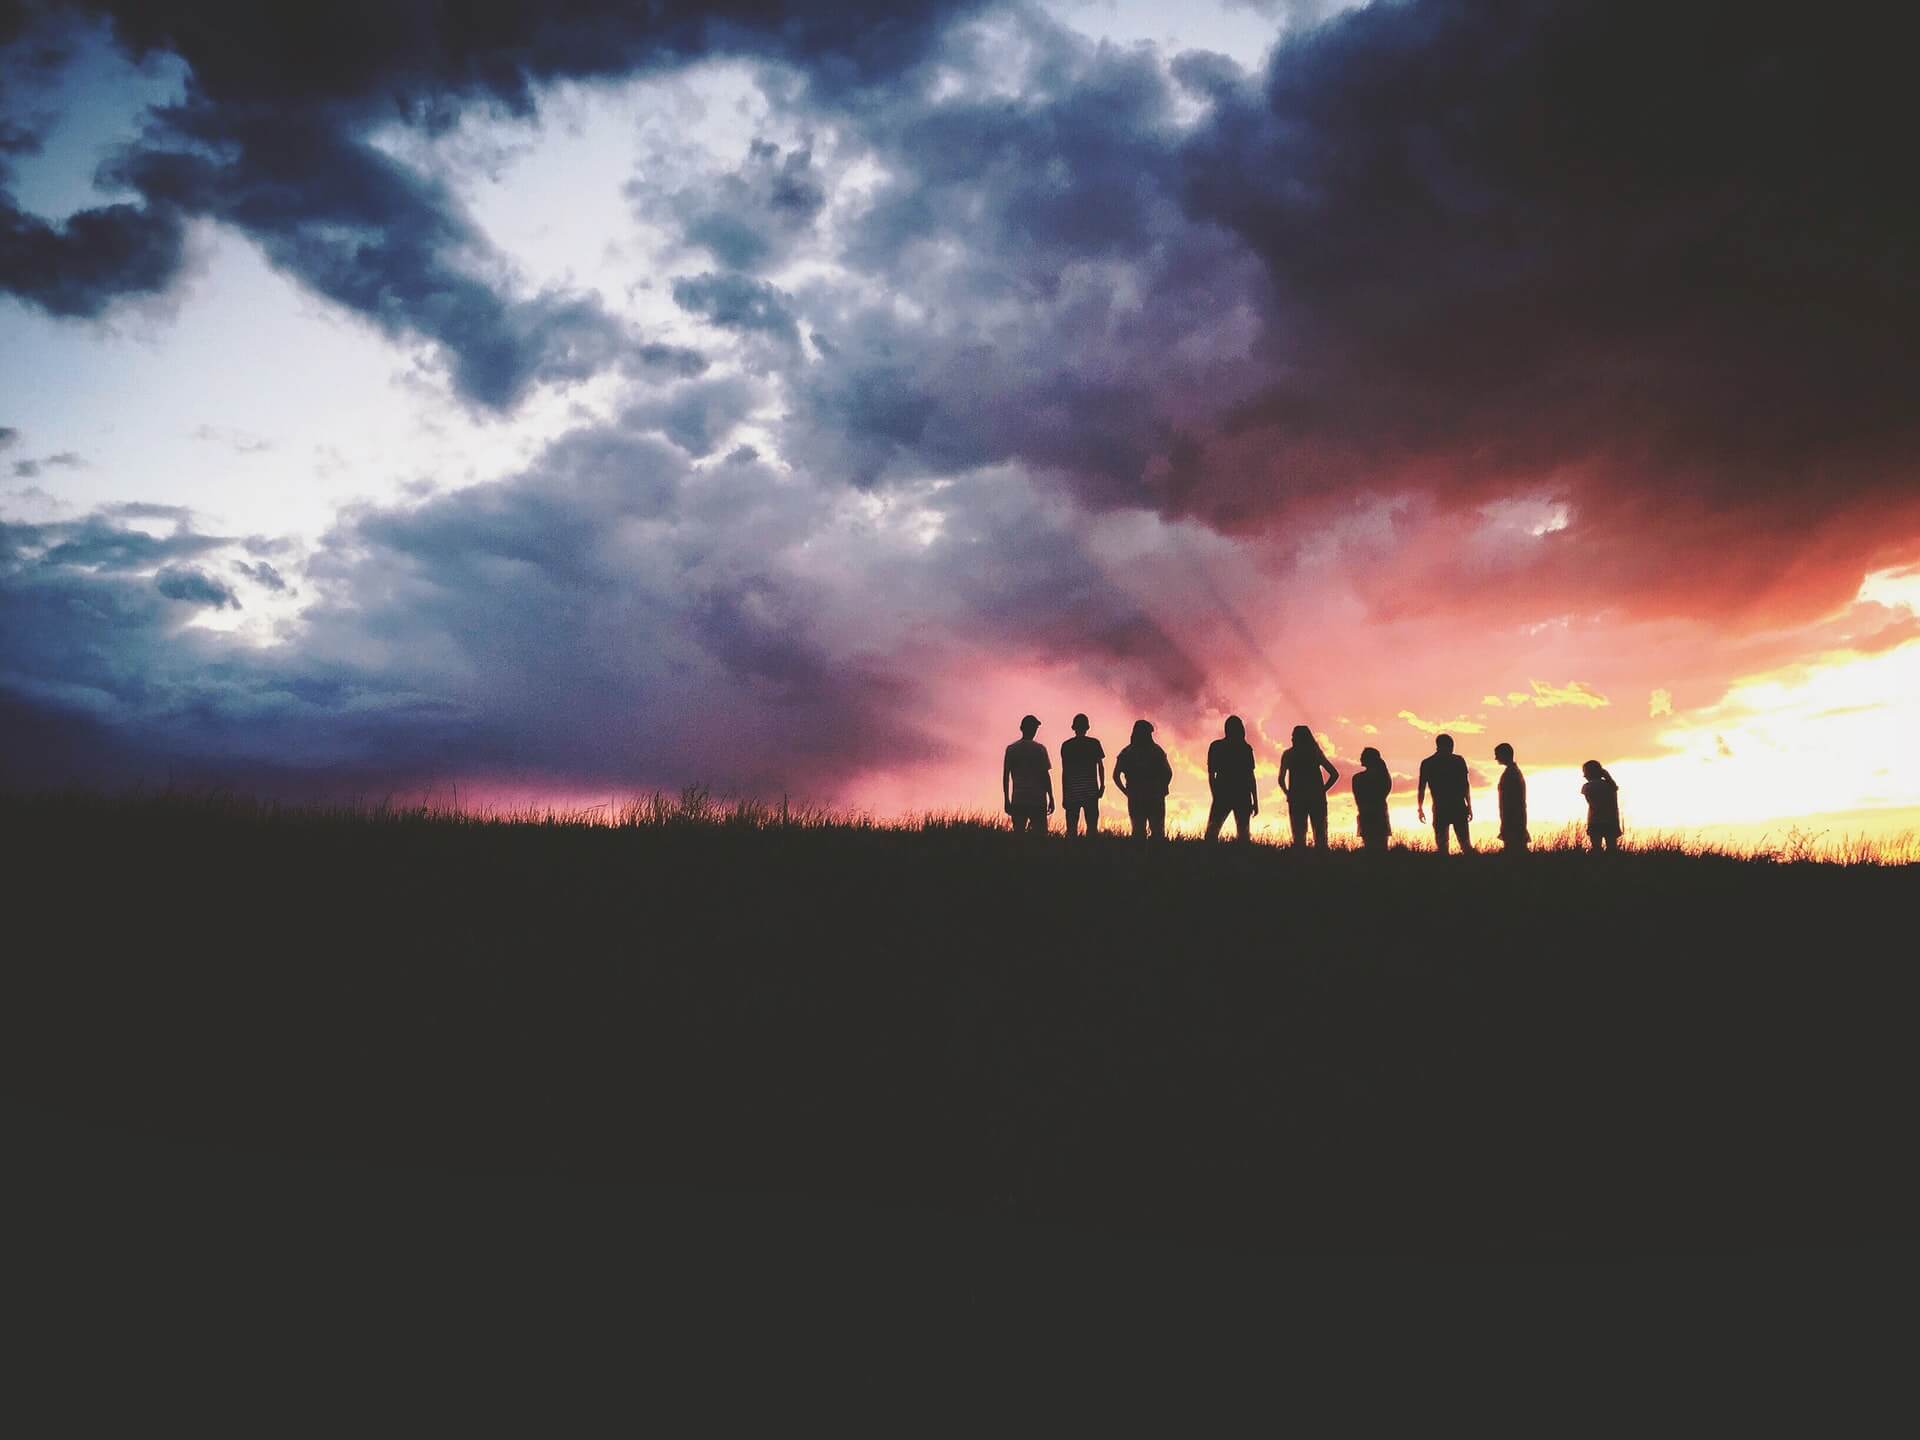 Image of nine distant people in silhouette with the ground in front of them long and dark and the horizon behind them half stormy and half sunset